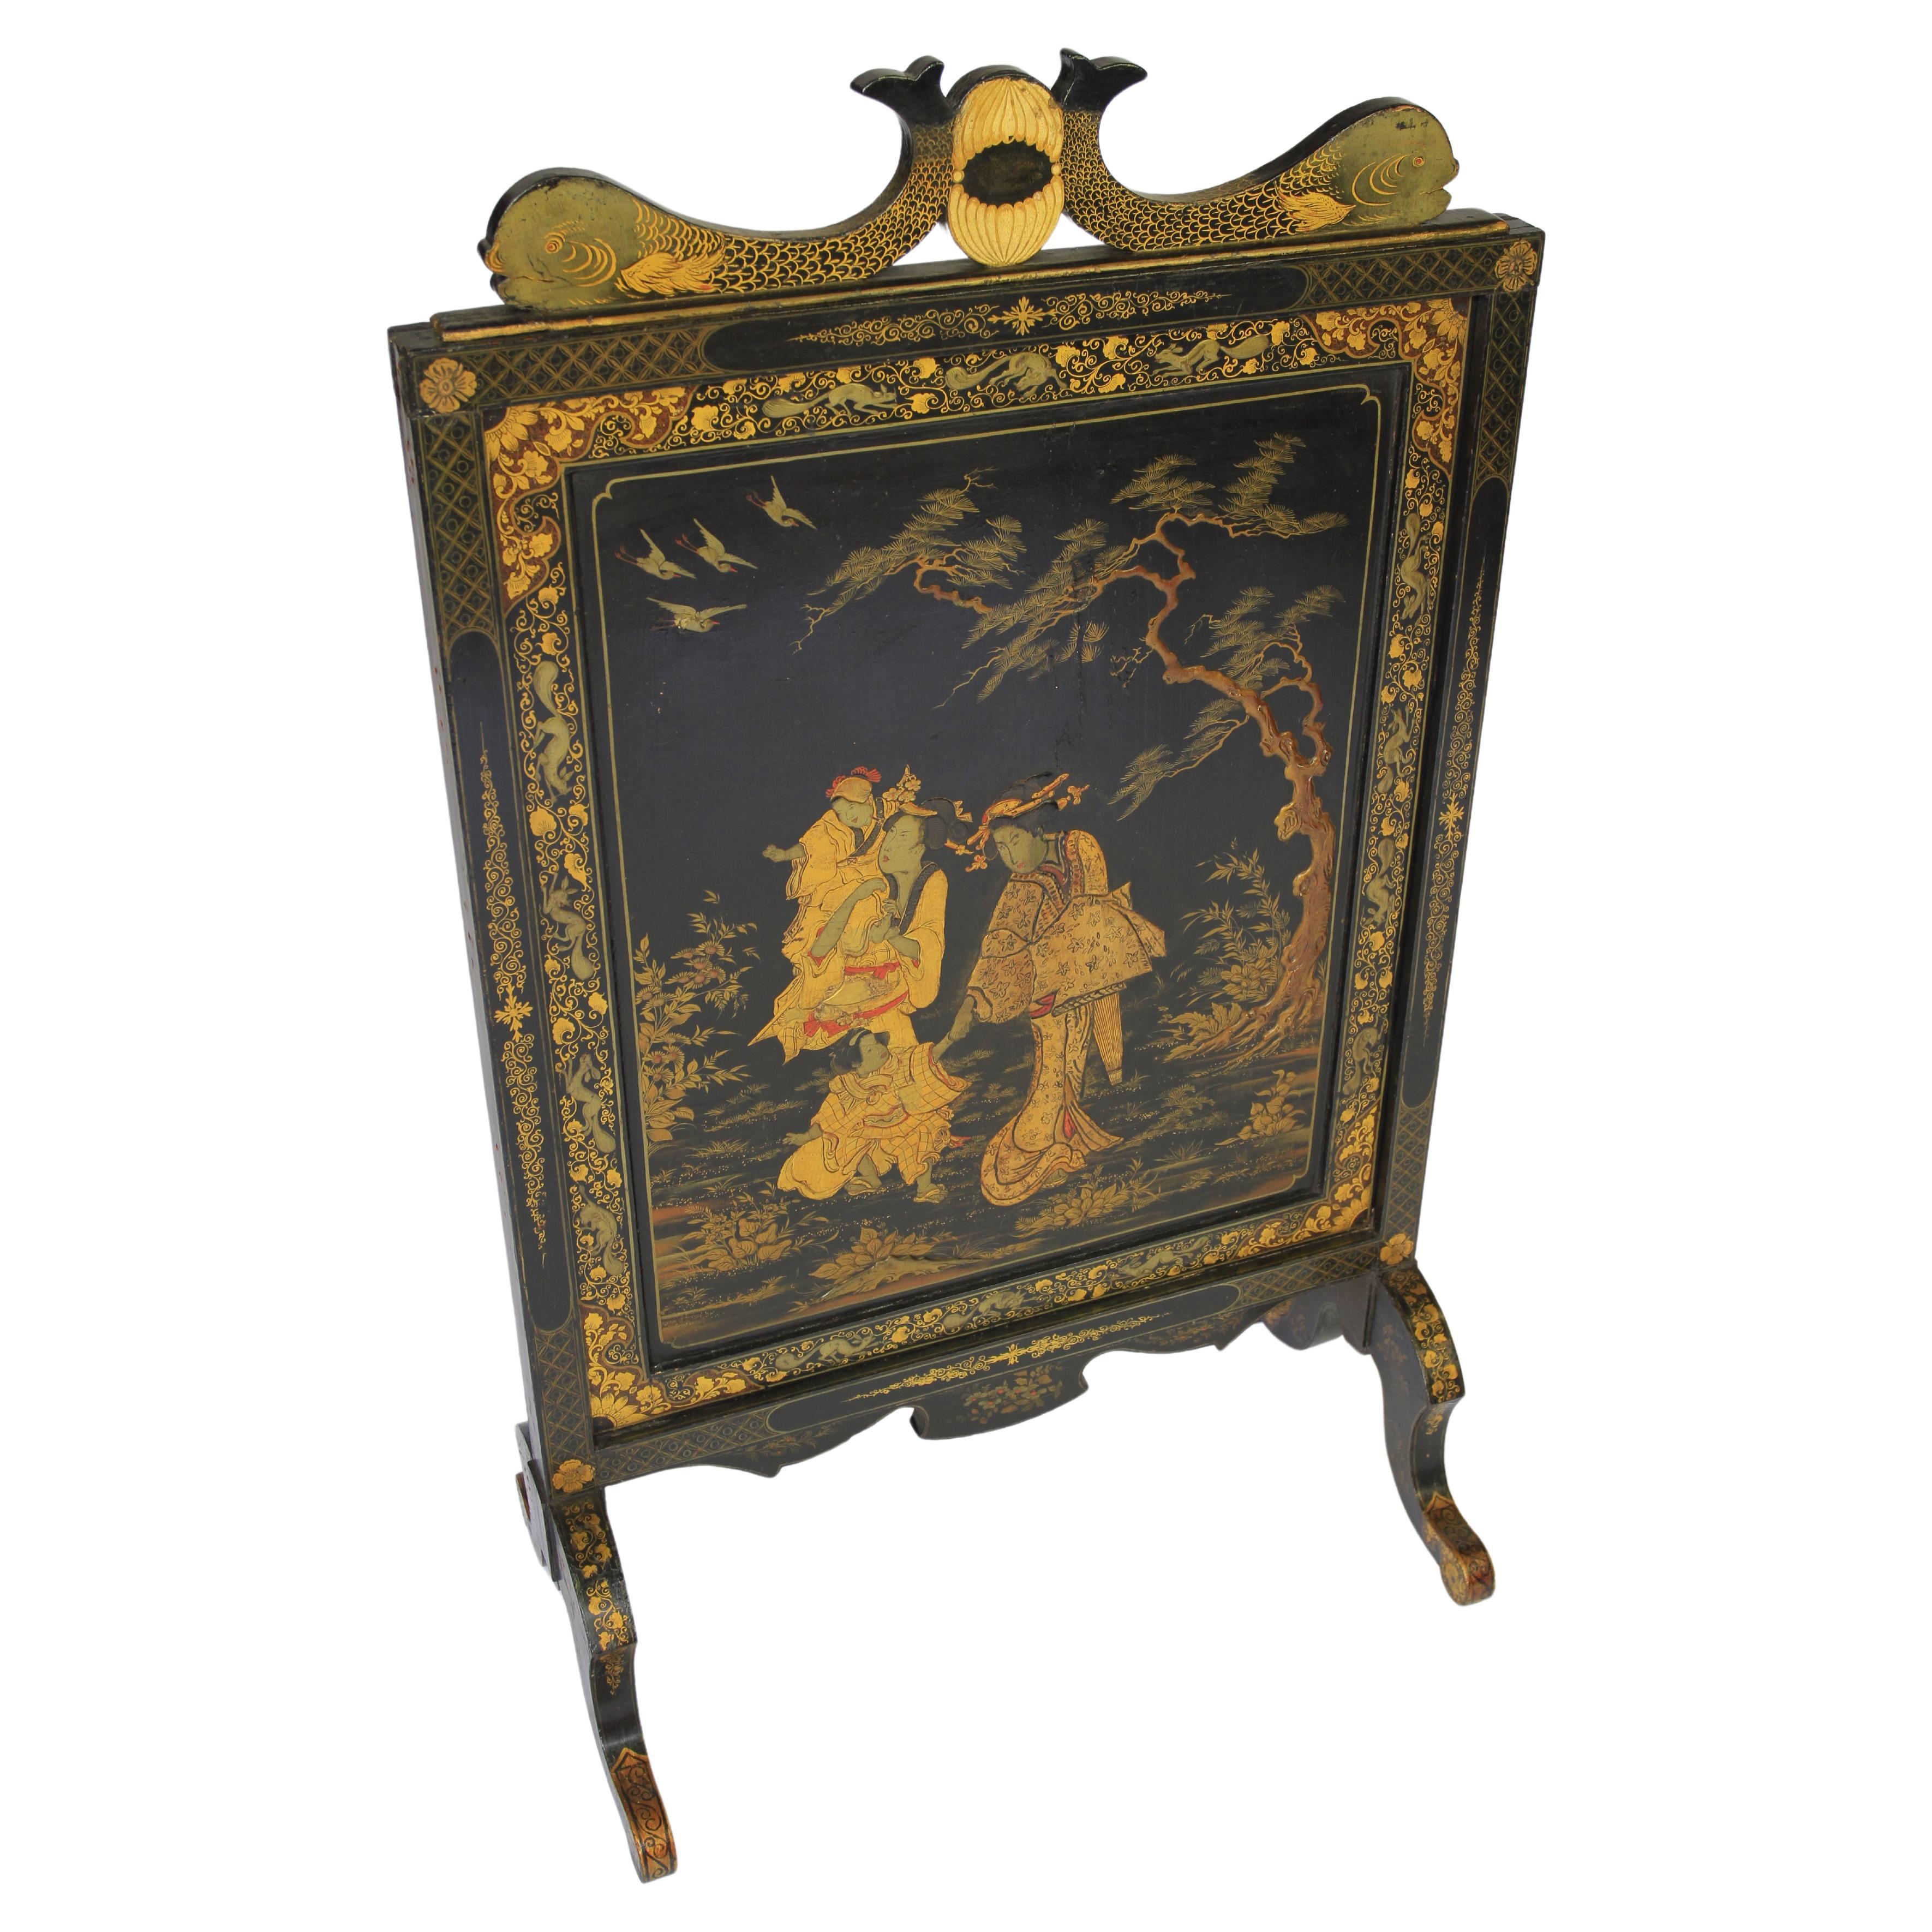 Chinoiserie Decorated fire screen circa 1900